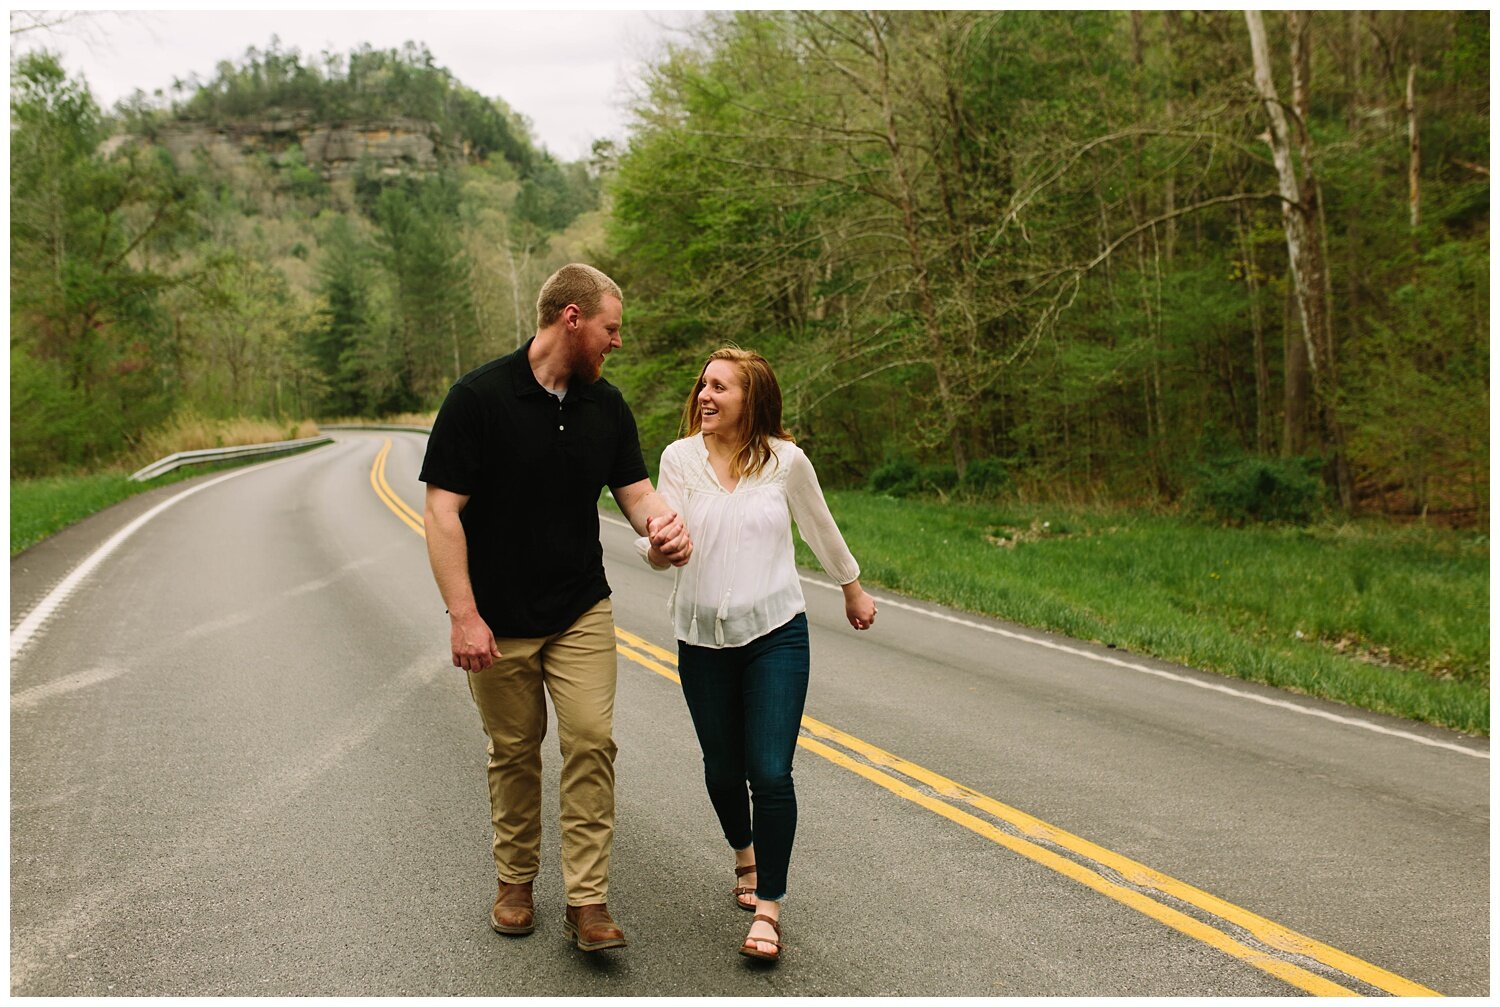 Kendra_Farris_Photography_Red_River_Gorge_Engagement_Photos-24.jpg